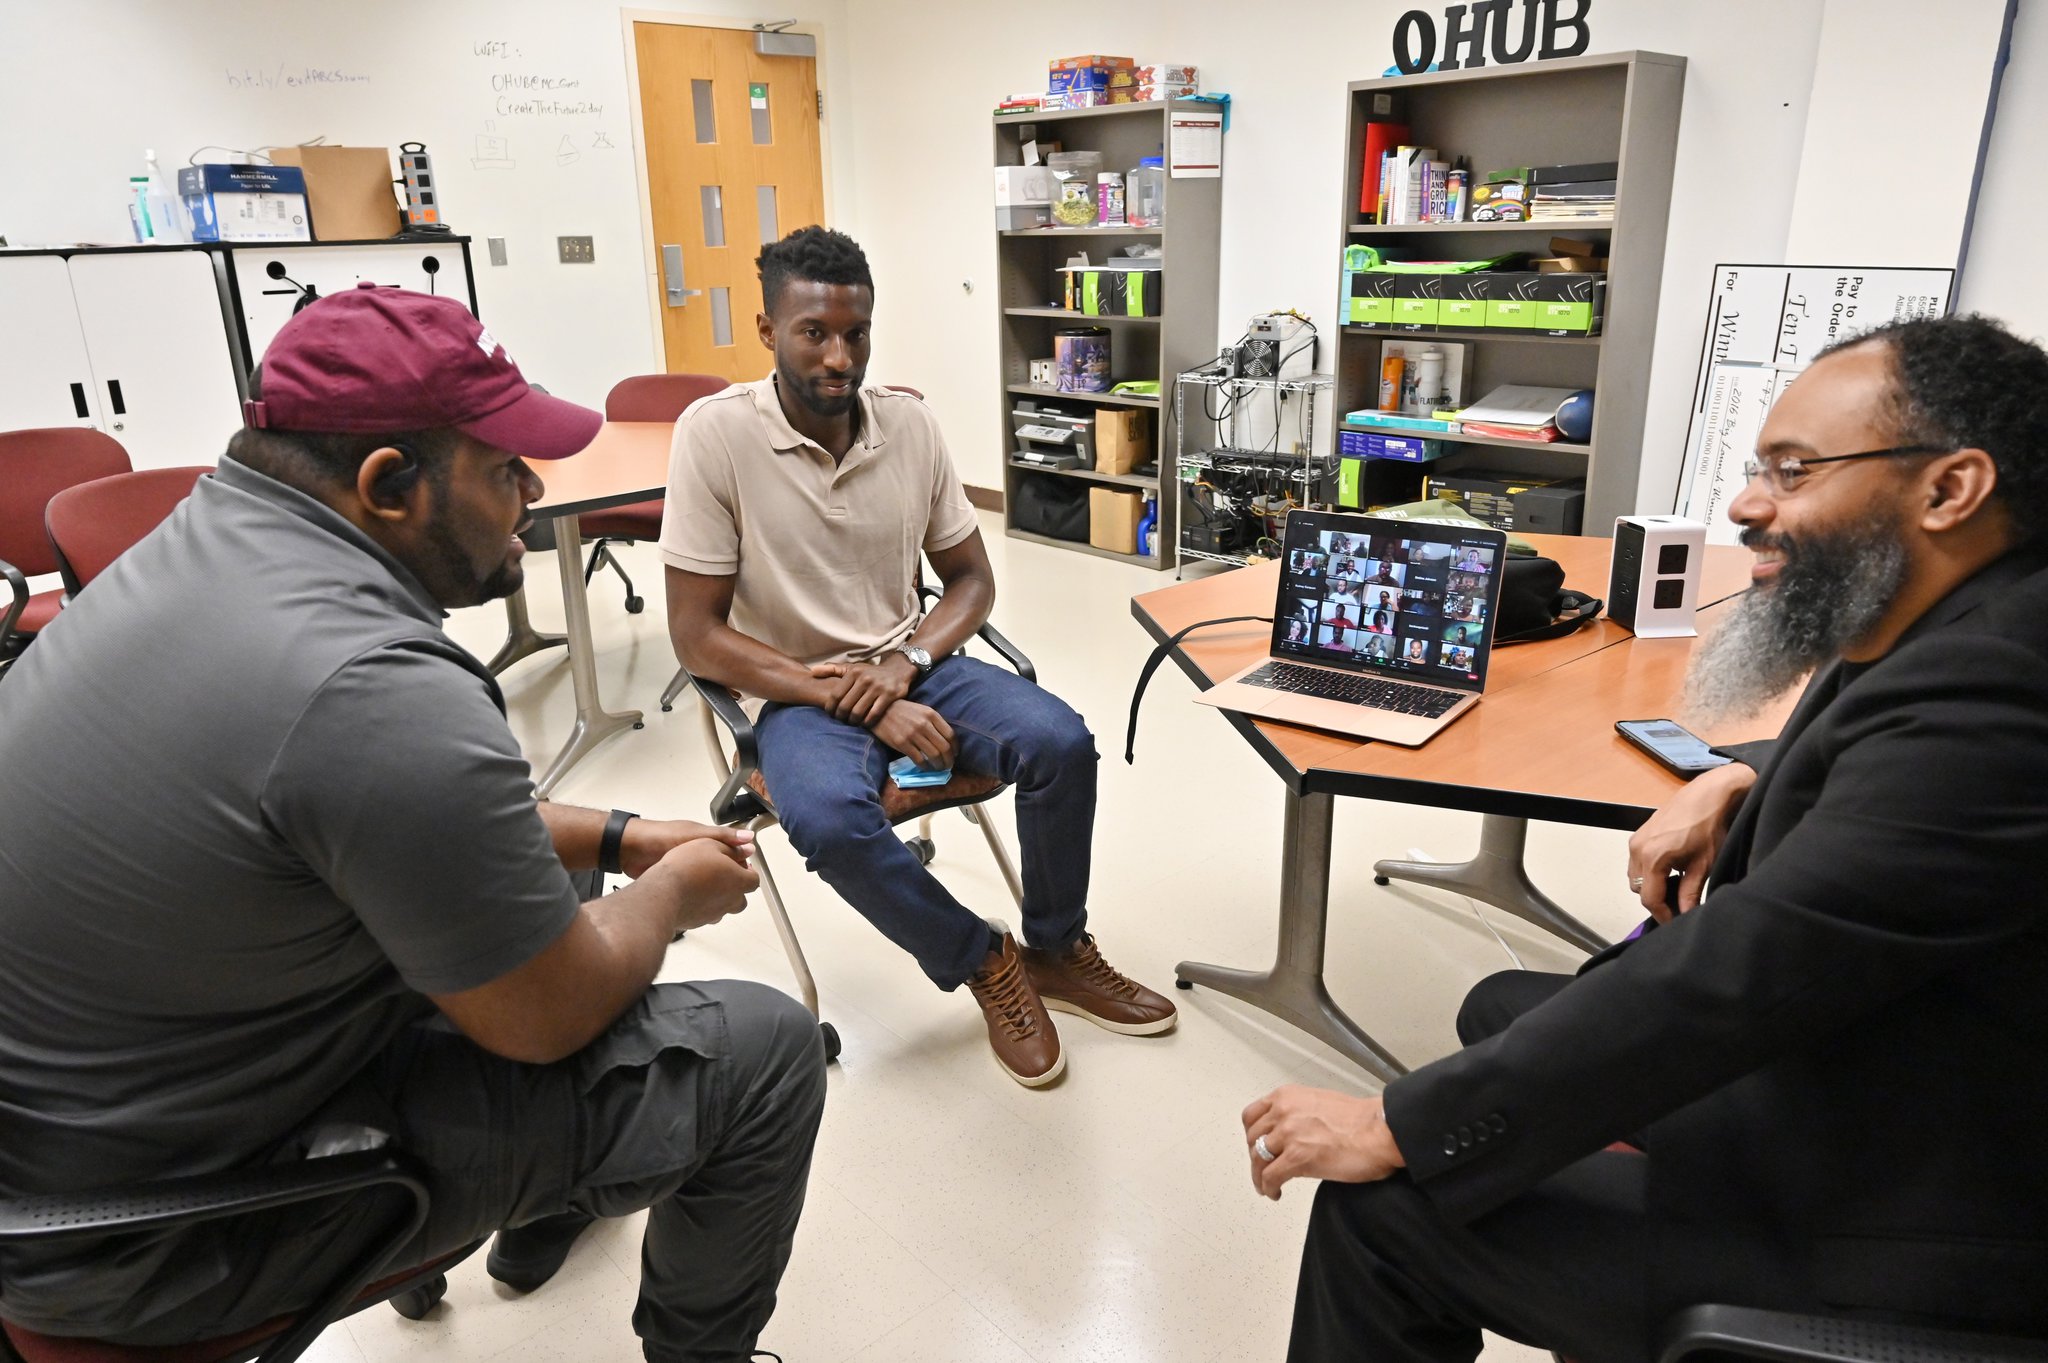 Kinnis Gosha (left), the Hortinius I. Chenault Endowed Division Chair for Experiential Learning and Interdisciplinary Studies, and Rodney Sampson (right), chairman & CEO of OHUB, speak to Morehouse student Corey Shaw during an online coding boot camp created by Morehouse College in 2020. The college started an online education program in 2021. (HYOSUB SHIN / HYOSUB.SHIN@AJC.COM)